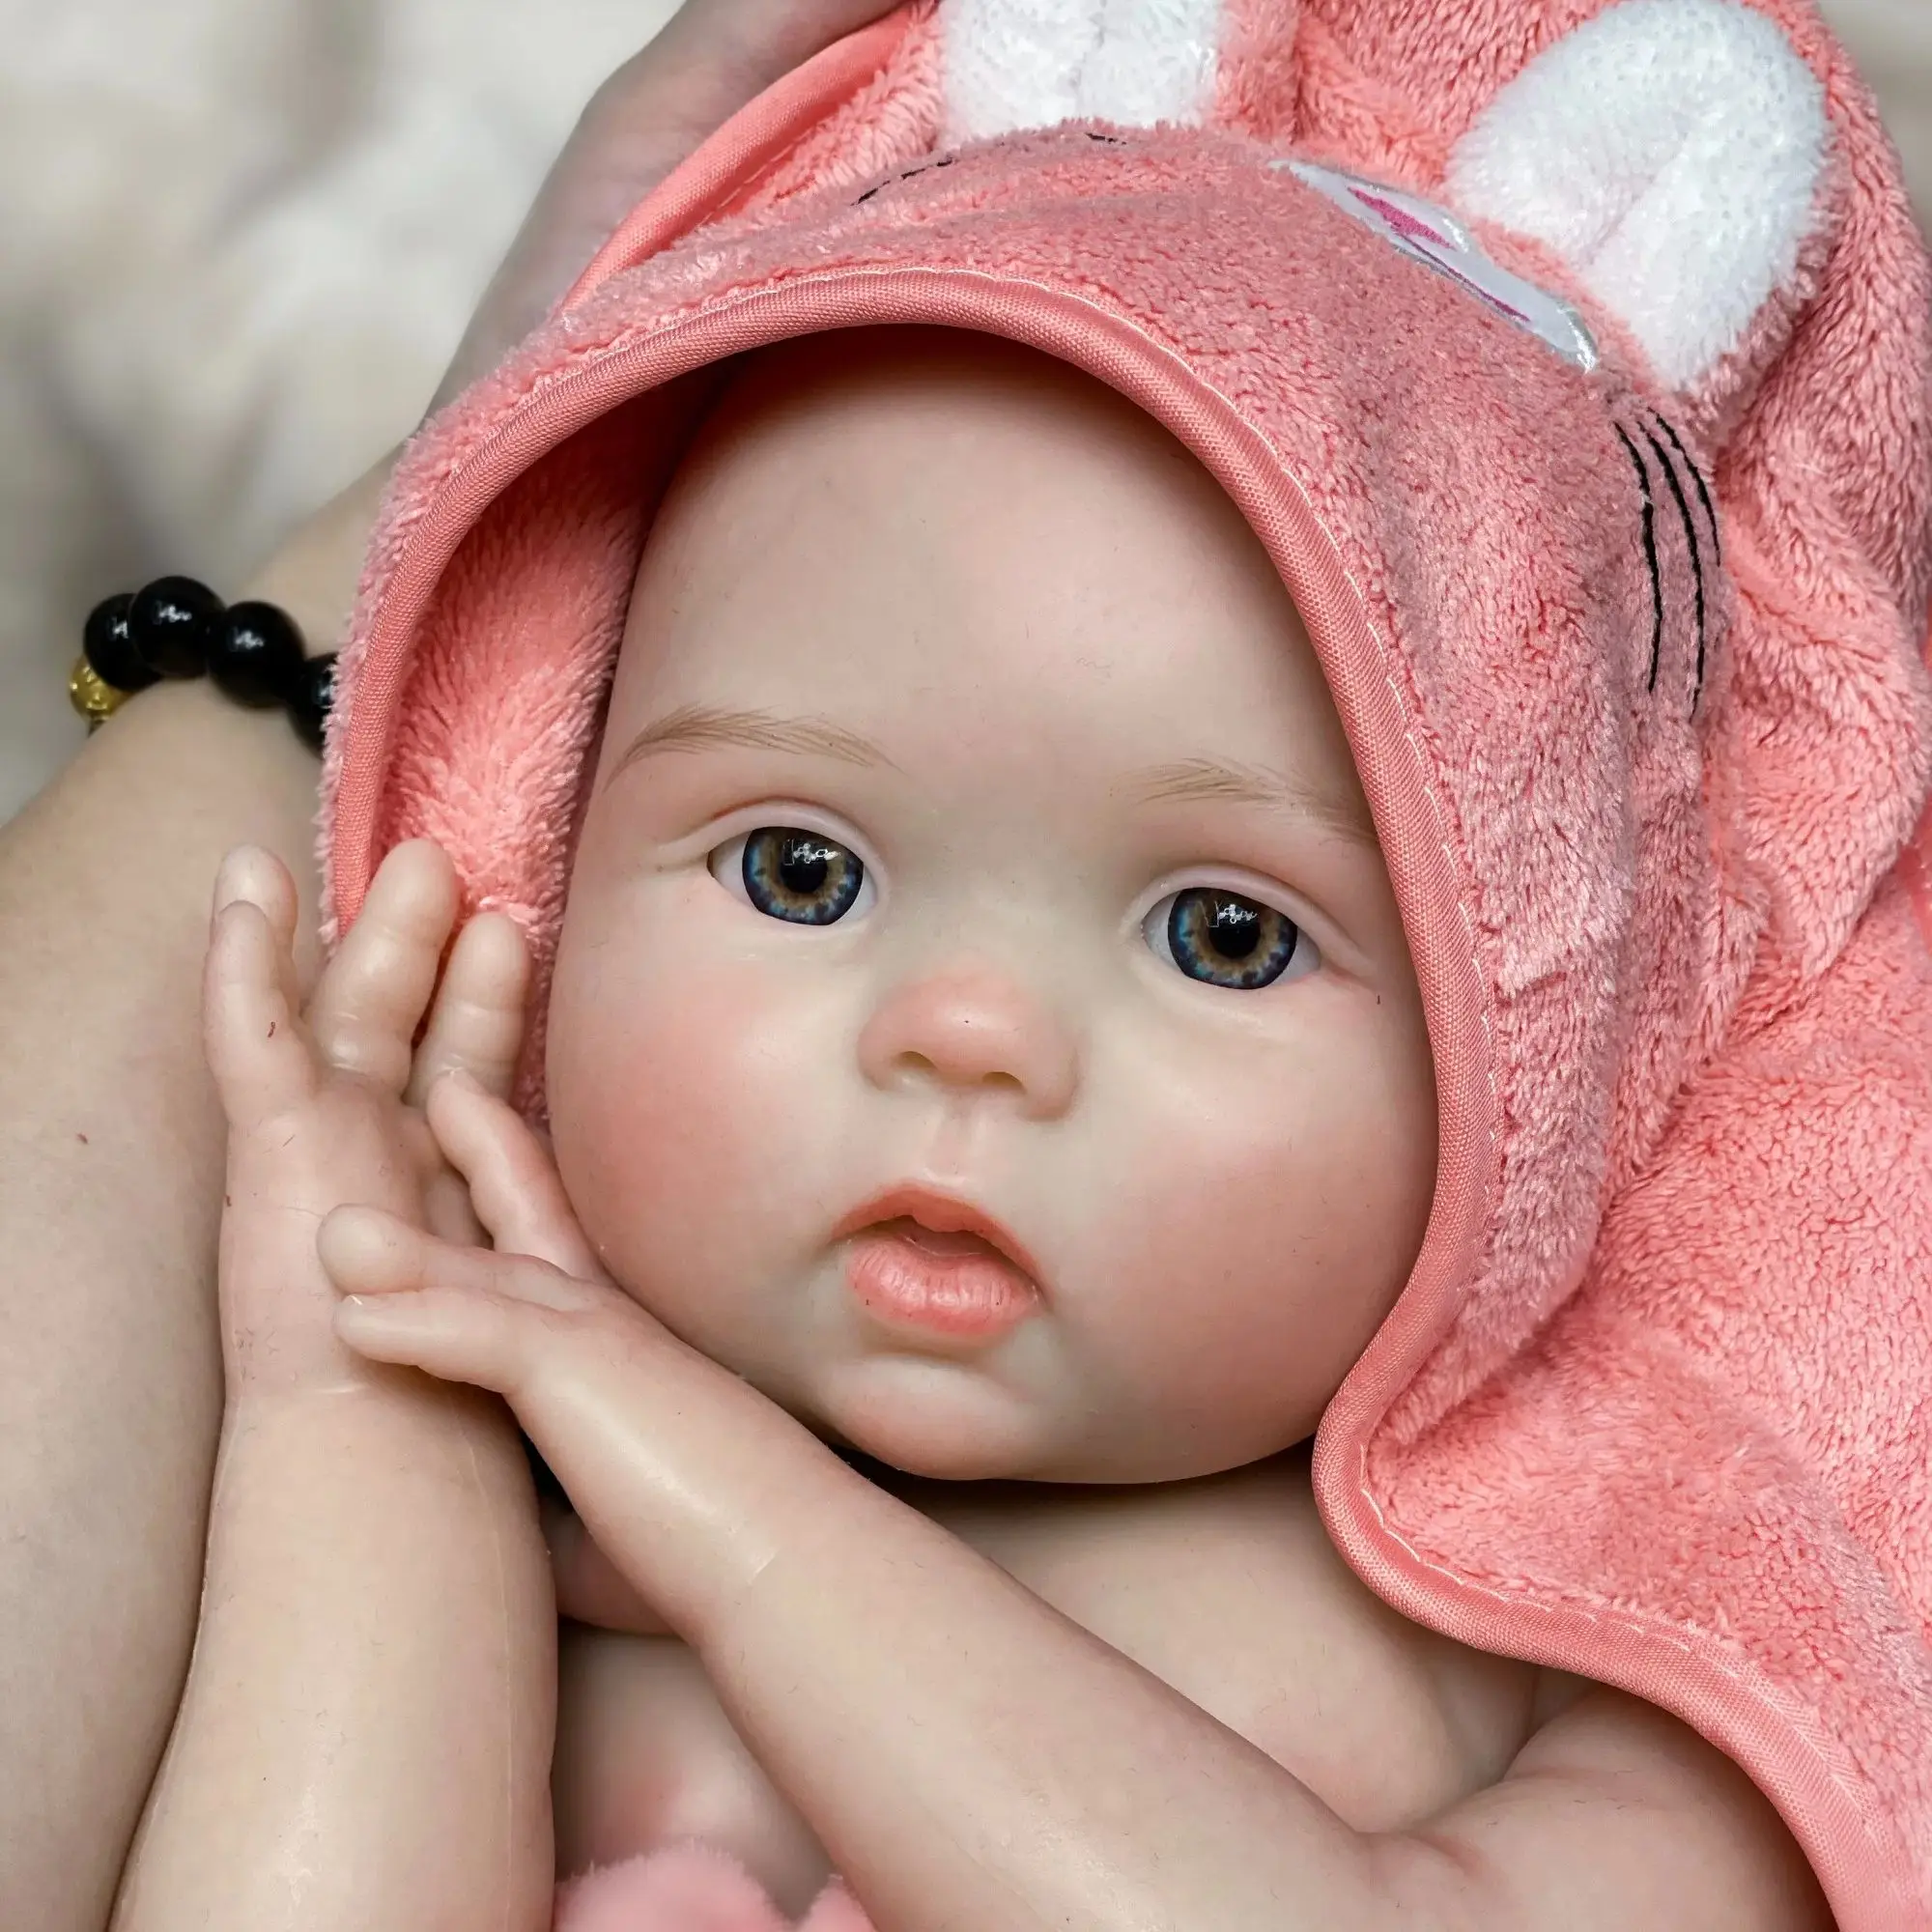 

45CM Whole Silicone Girl Unpainted/Painted Realistic Full Body Soft Solid Silicone Reborn Baby Doll Reborn Corpo De Silicone